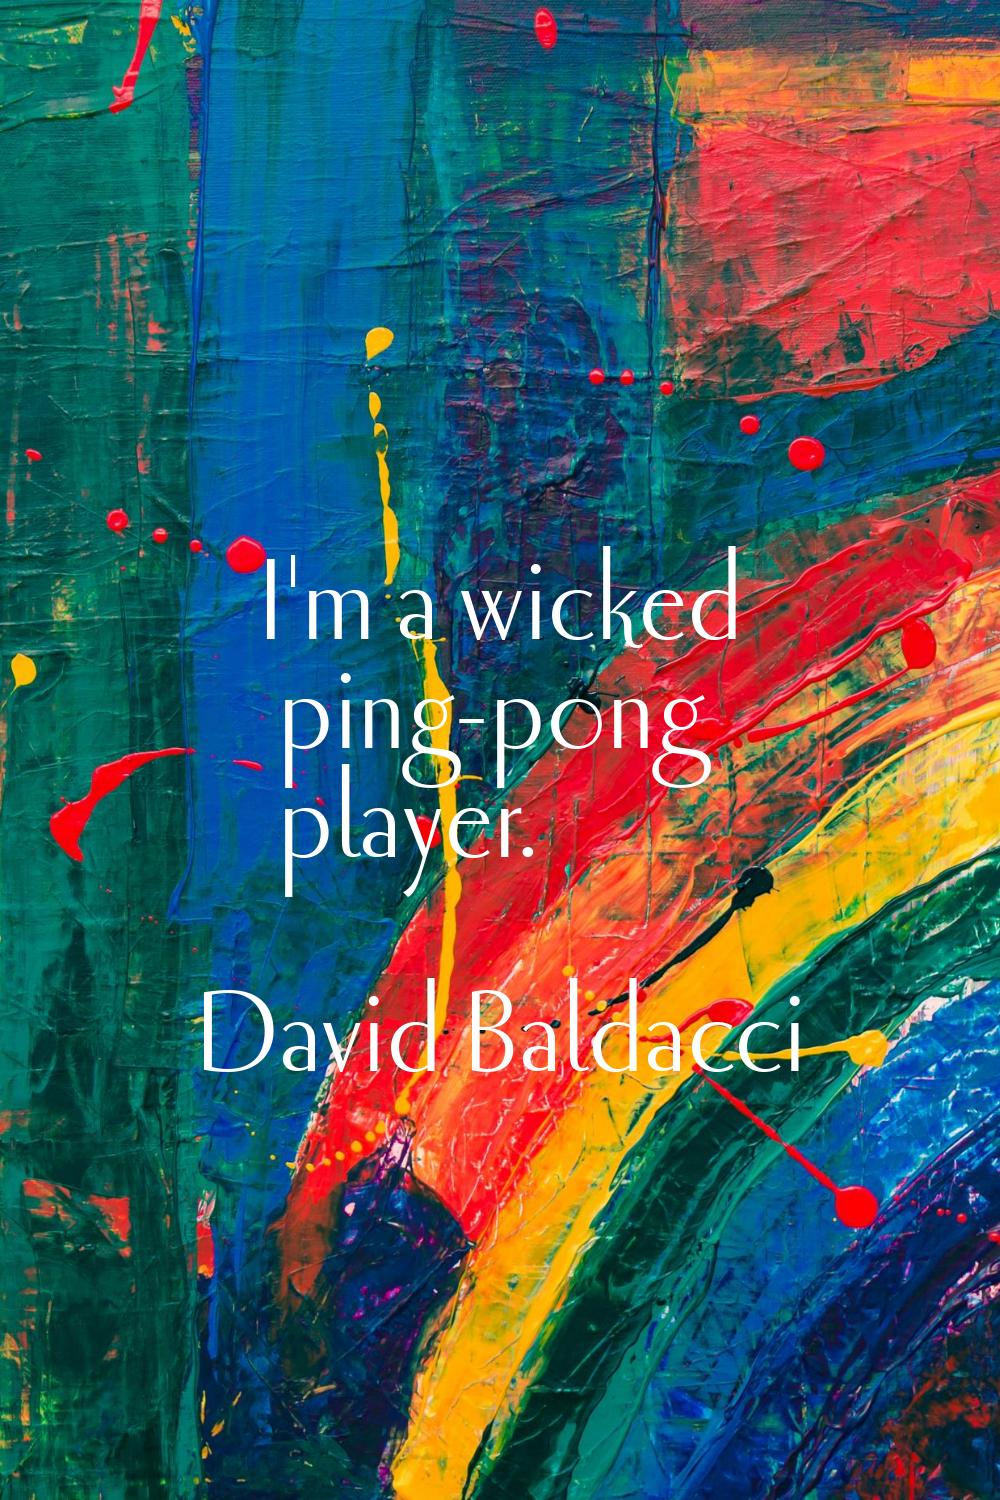 I'm a wicked ping-pong player.